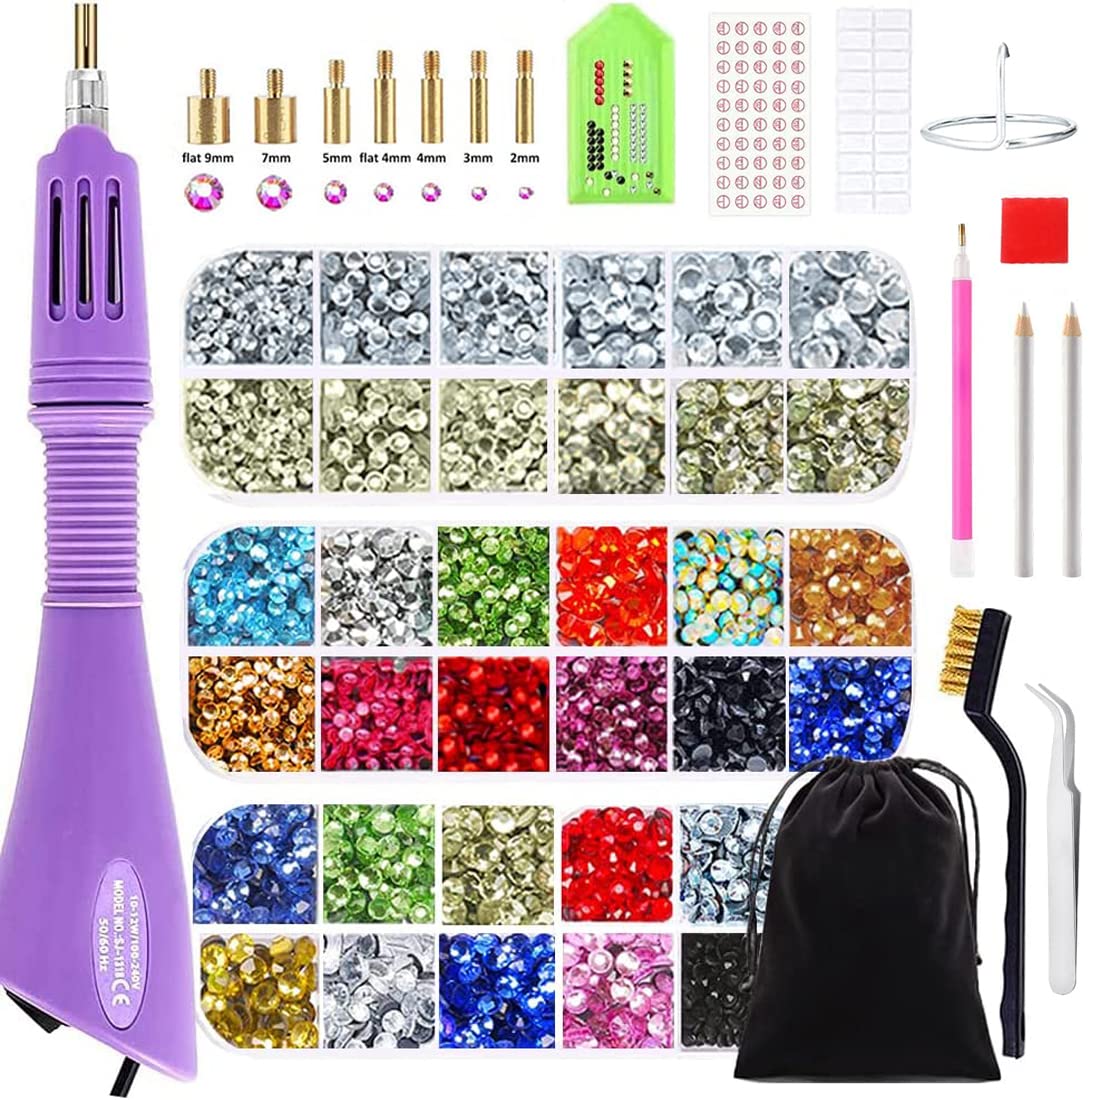 Epesl Bedazzler Kit with Rhinestones, Hot Fixed Gems Craft Applicator -  Diamond Painting Pen, Wax Pencil, Tweezers, Tray, Cleaning Brush, Picker  Rhinestones Crystals for DIY Clothes Shoes